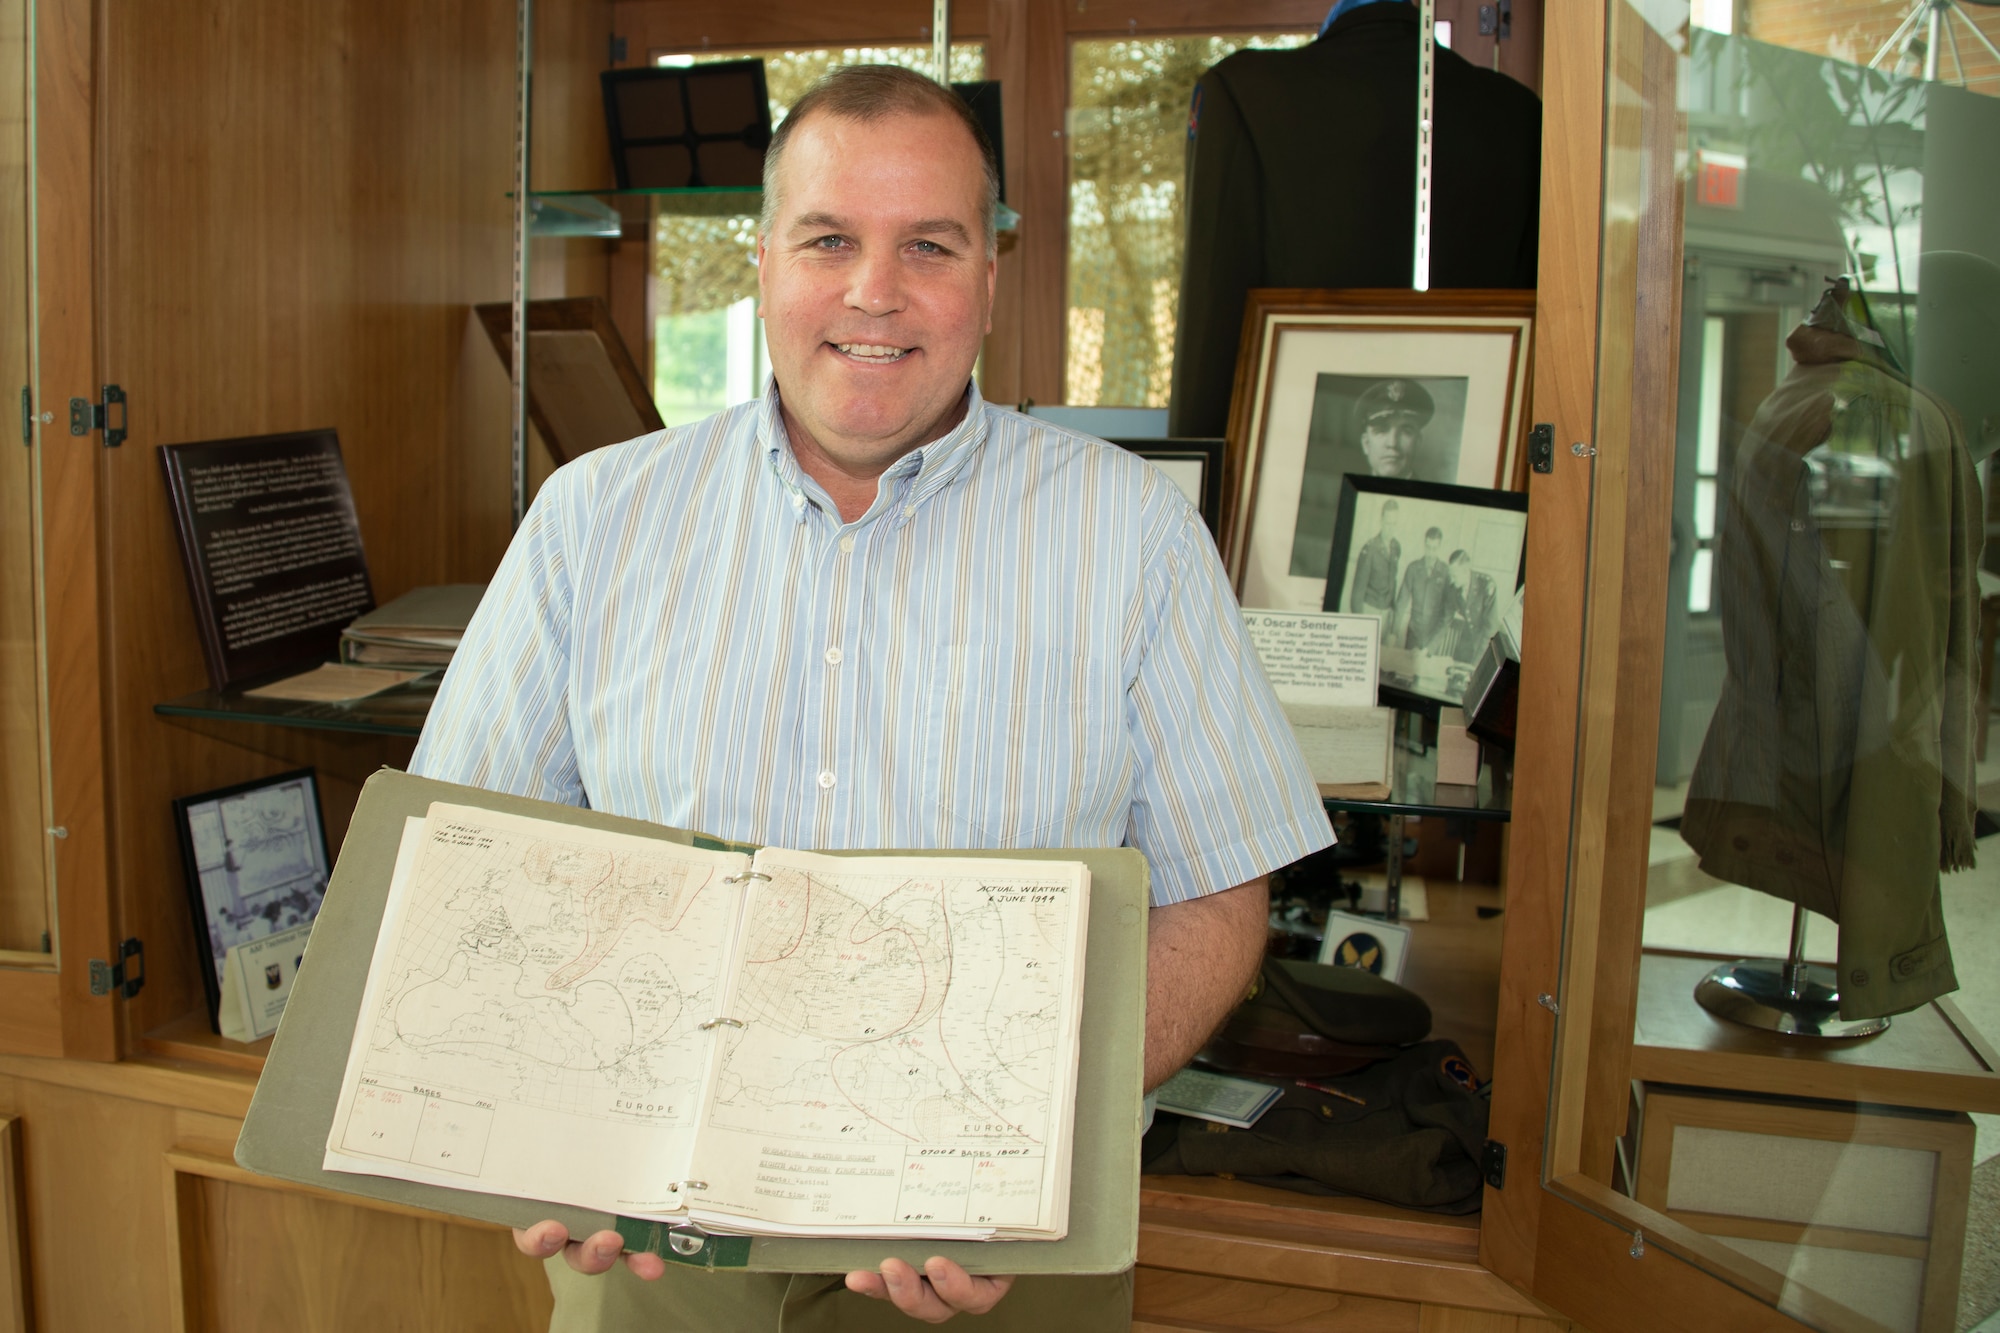 Dr. Kent Sieg, 557th Weather Wing historian, shows an 8th Air Force weather map depicting the predicted and actual weather conditions for Europe for June 6, 1944, at the 557th Weather Wing headquarters building, Offutt Air Force Base, Nebraska, May 29, 2019. Originally scheduled for June 5, 1944, forecasts for bad weather led D-Day planners to delay the invasion of Europe to June 6, 1944. (U.S. Air Force photo by Paul Shirk)